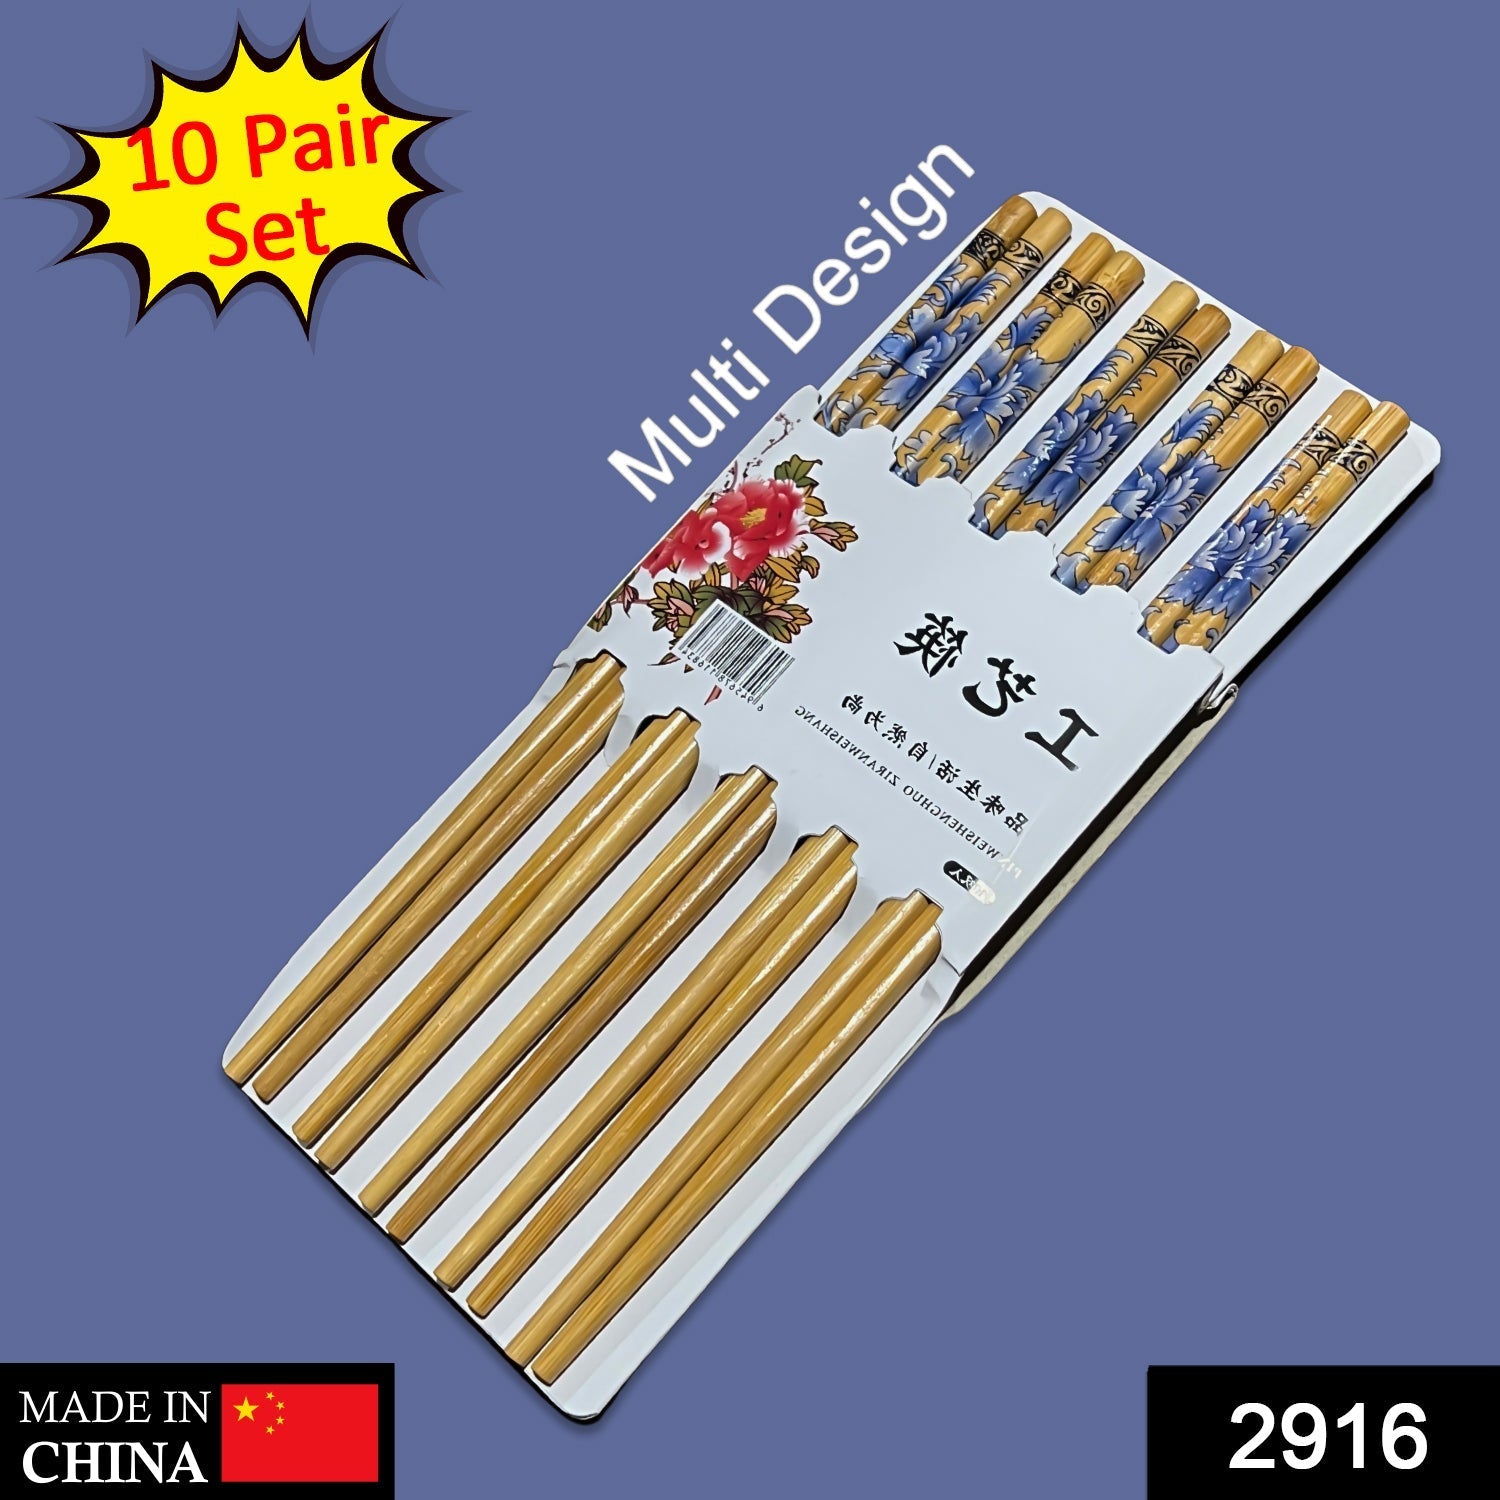 2916 10PAIR MULTI DESIGN  CHOPSTICKS SET LIGHTWEIGHT EASY TO USE CHOP STICKS WITH CASE FOR SUSHI, NOODLES AND OTHER ASIAN FOOD DeoDap